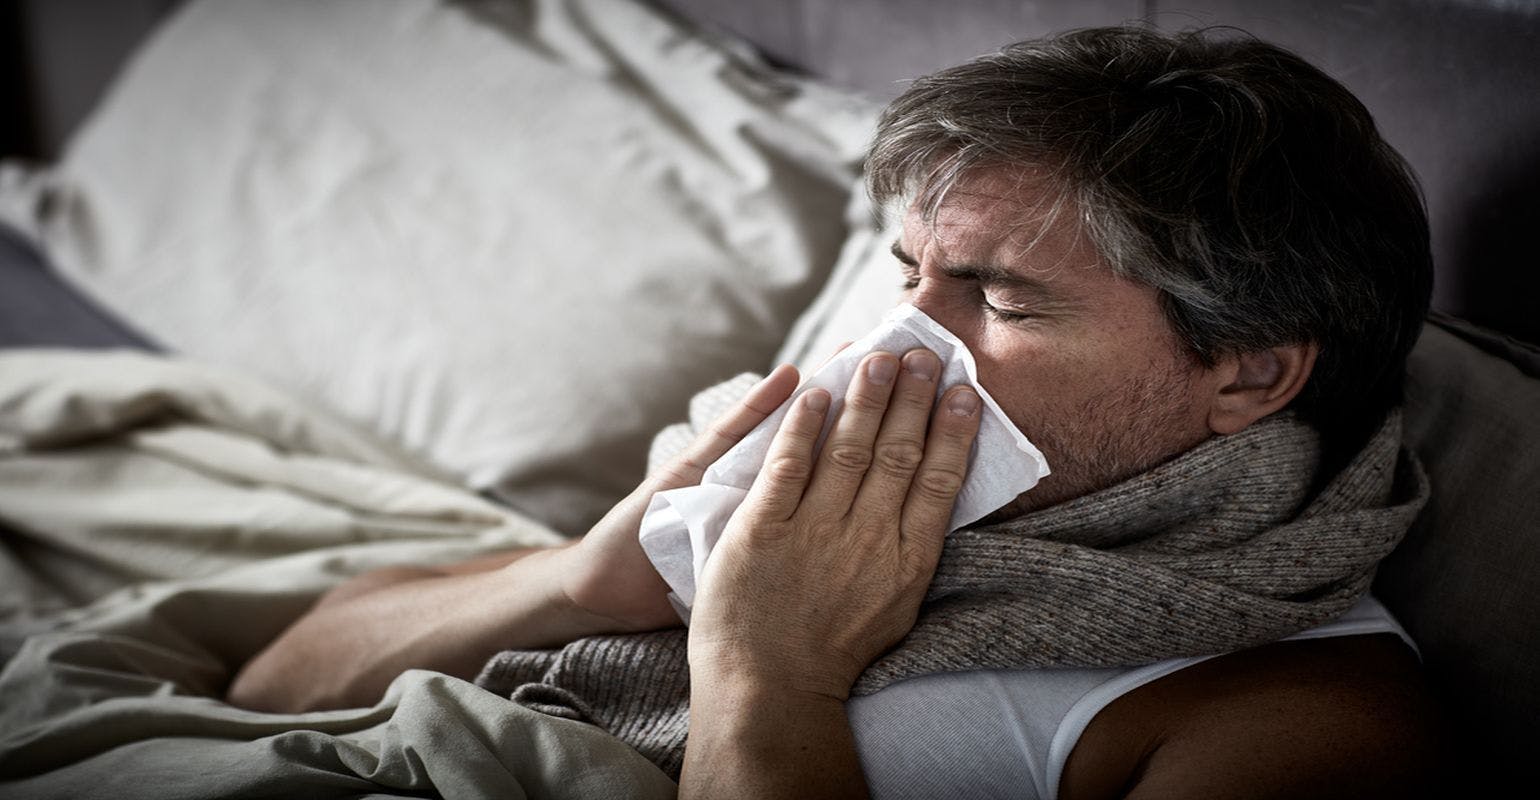 New Call to Action Issued on the Dangers of Influenza Among Adults with Chronic Health Conditions